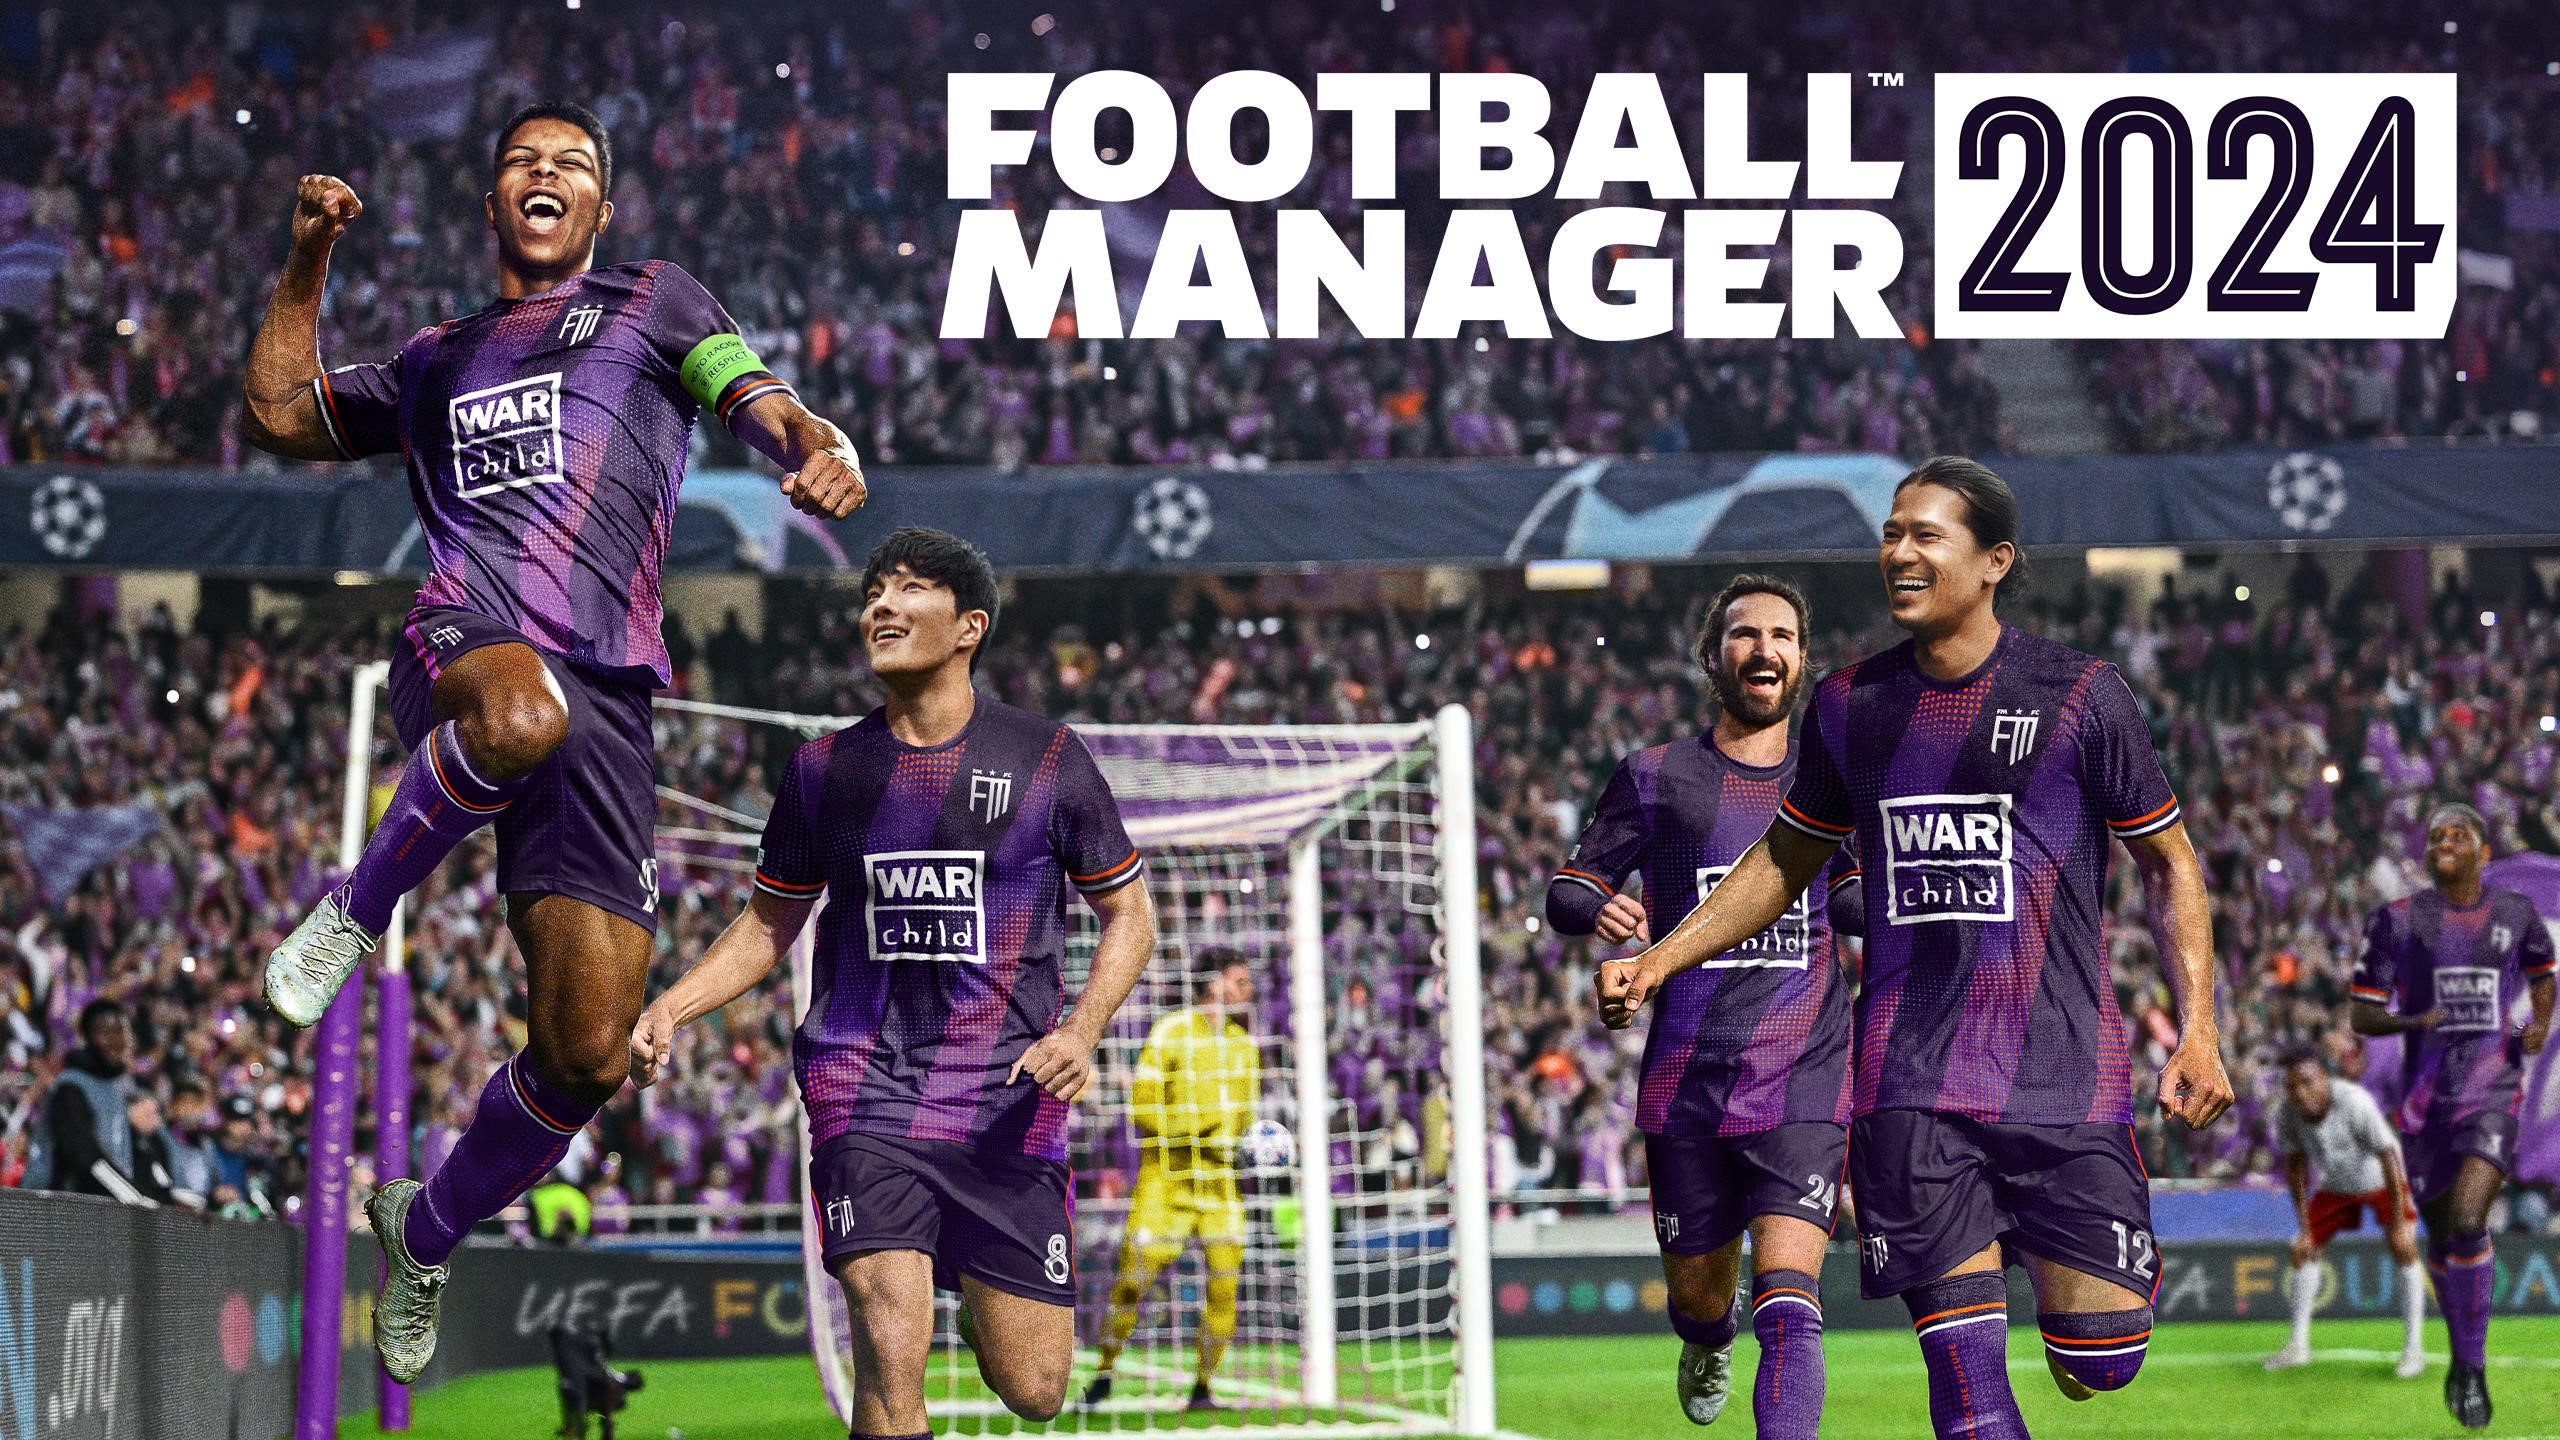 Buy Football Manager PASS PC (12 months)🎮 for 1.92